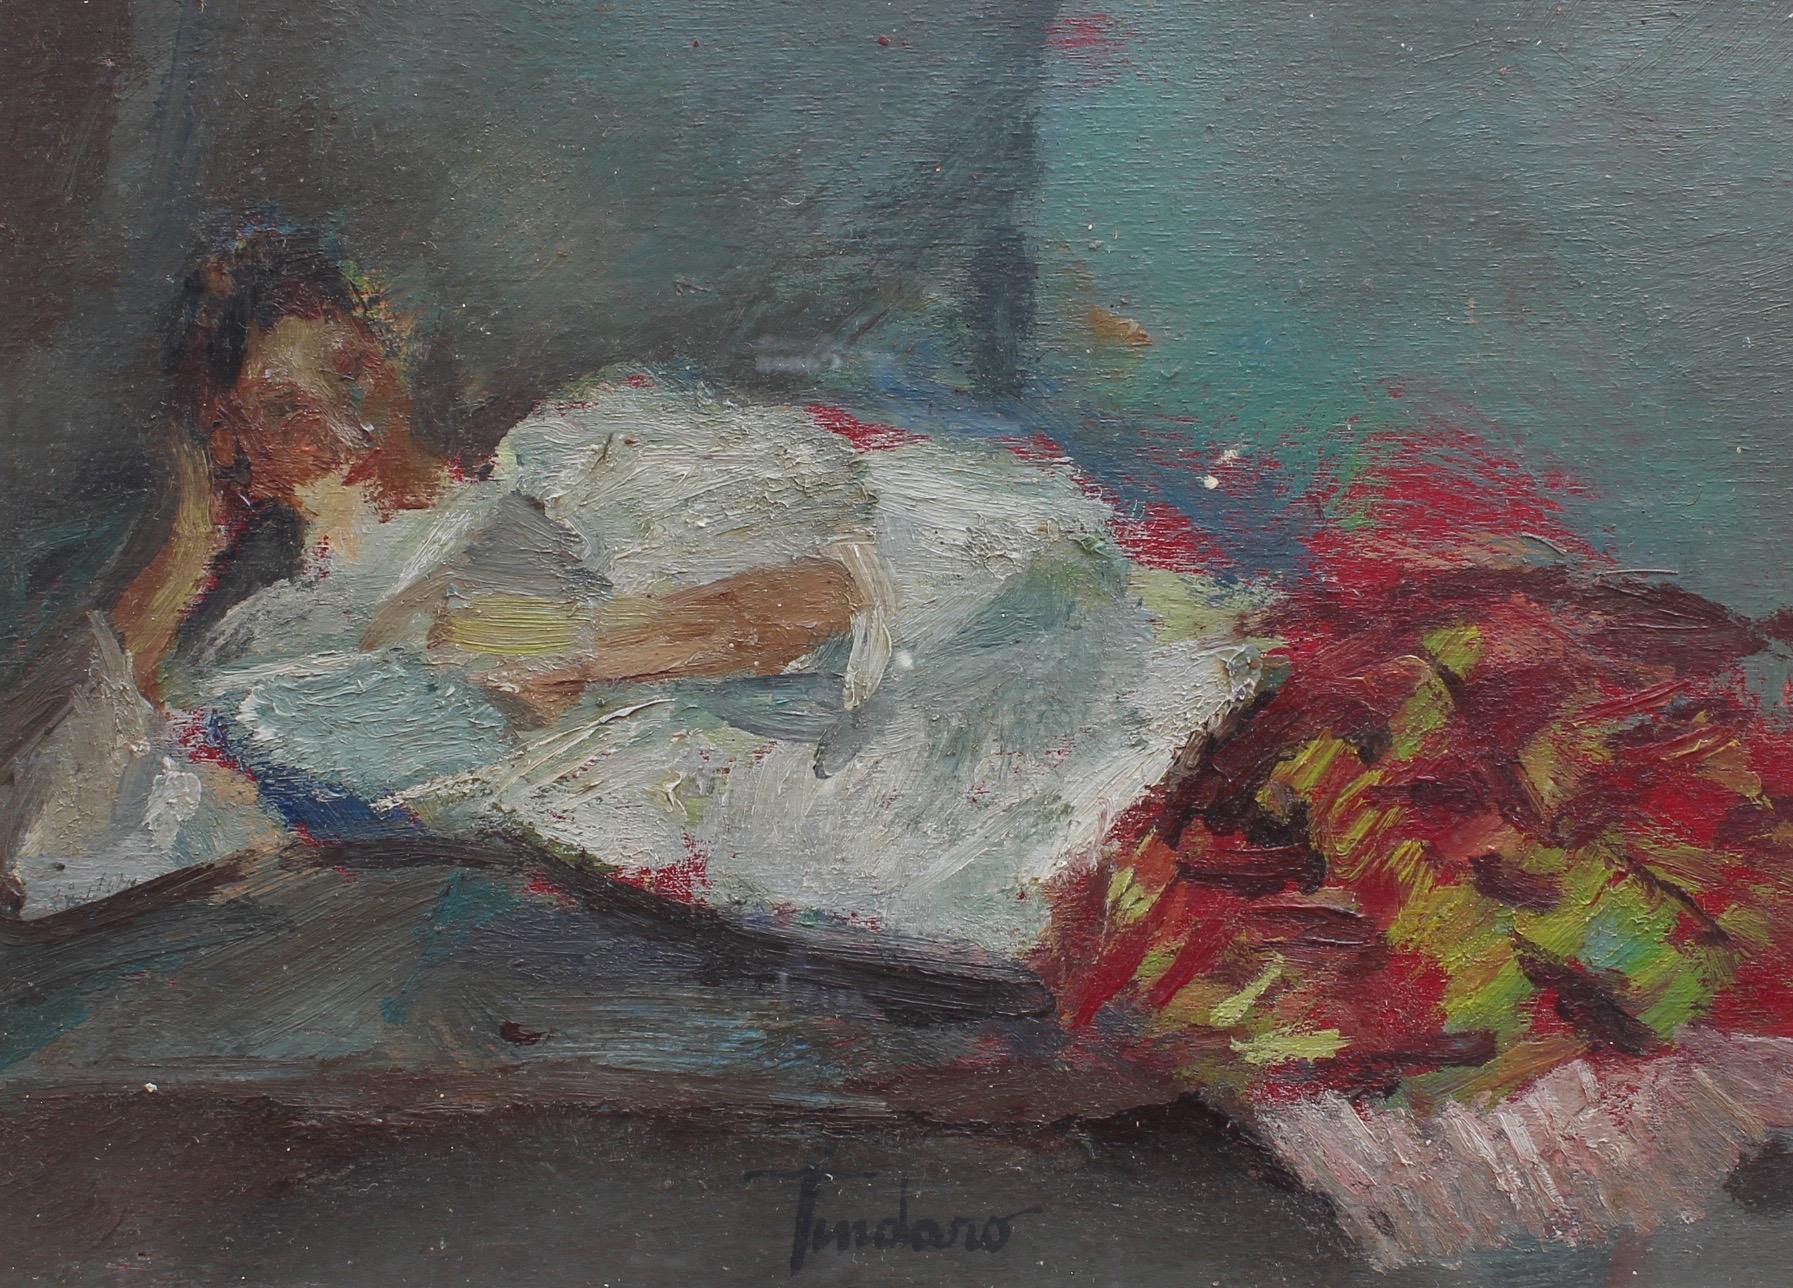 'Reclining Woman in Red Skirt', oil on board (circa 1930s), by Italian artist, Tindaro. An elegant artwork of a beautiful woman in white top and colourful red skirt lying in casual repose. The subject appears perfectly at ease as would someone who